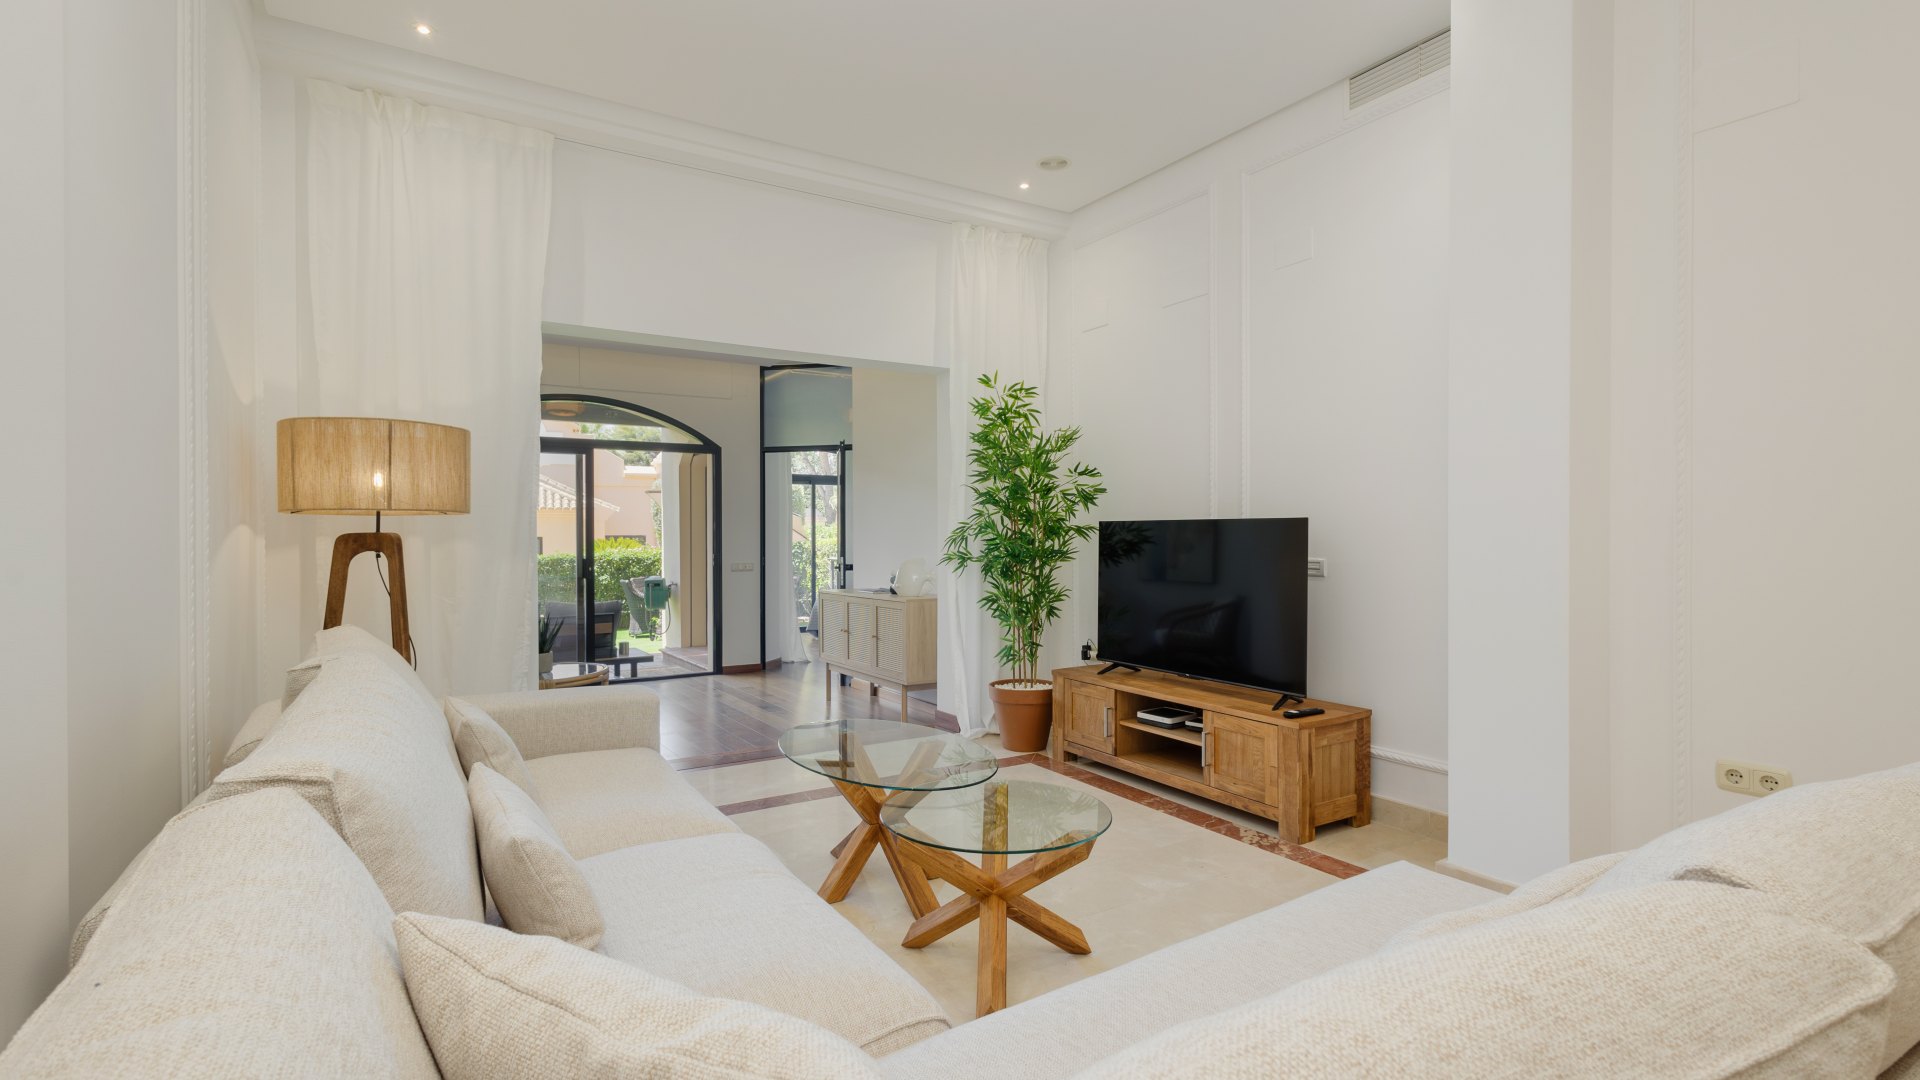 3 bedroom apartment, with private garden and terrace, in Puerto Banús